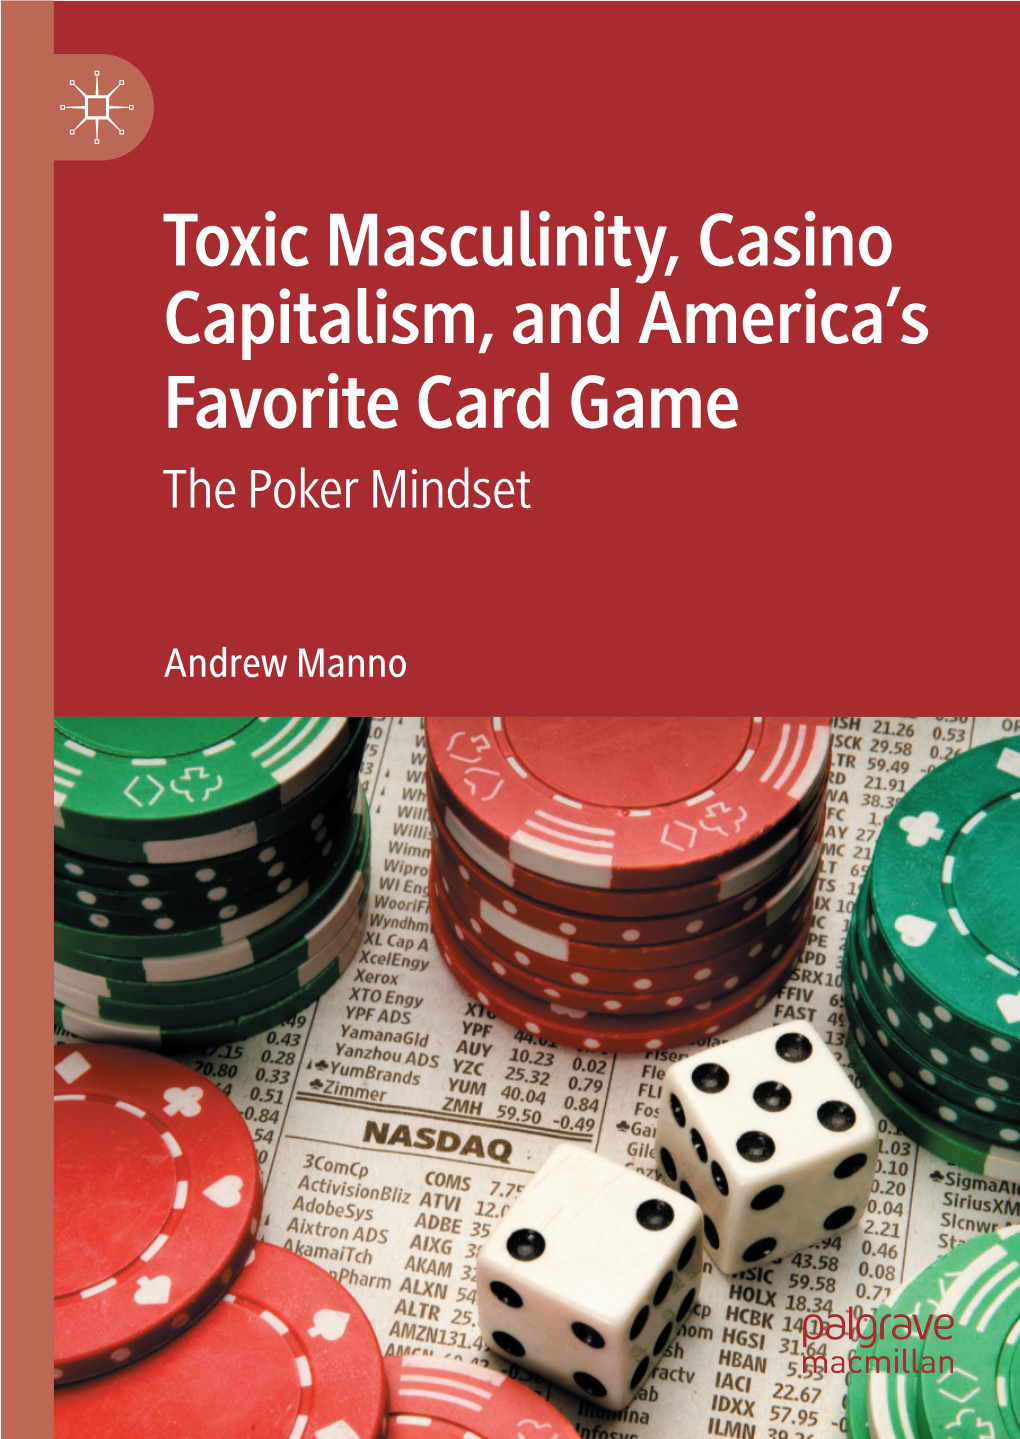 Toxic Masculinity, Casino Capitalism, and America's Favorite Card